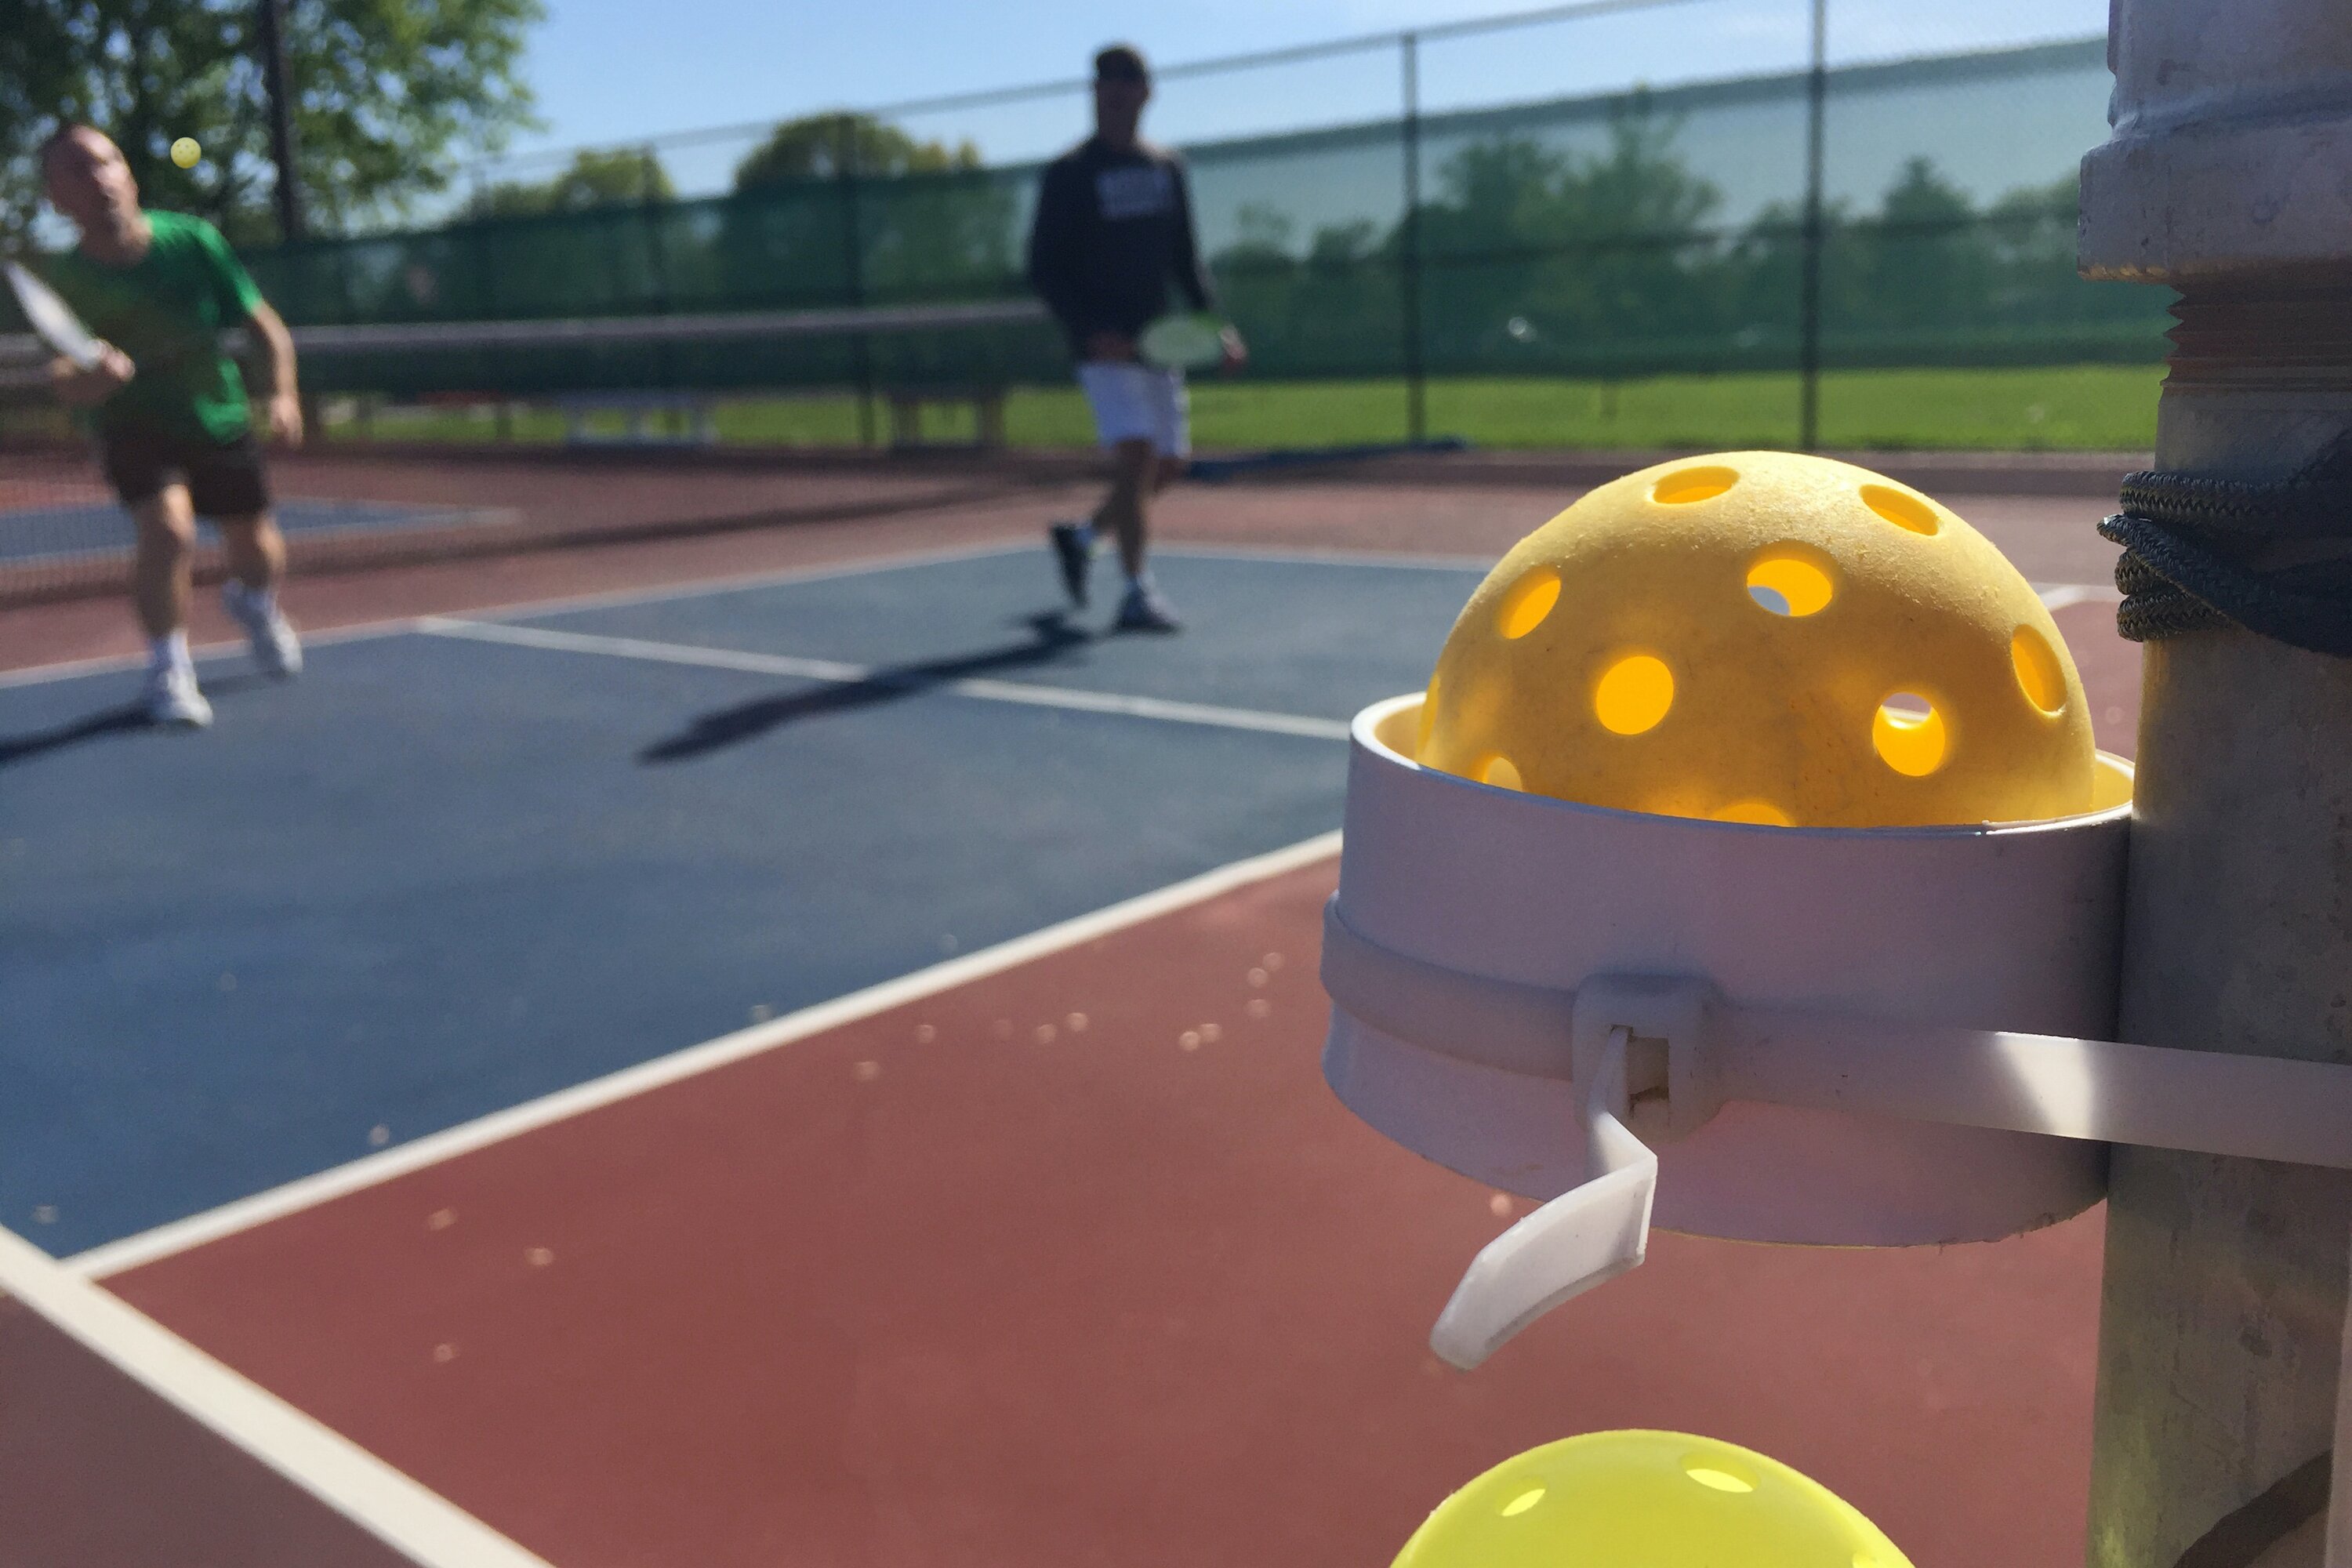 Want to level up? Register for these pickleball tournaments (for less than $100)